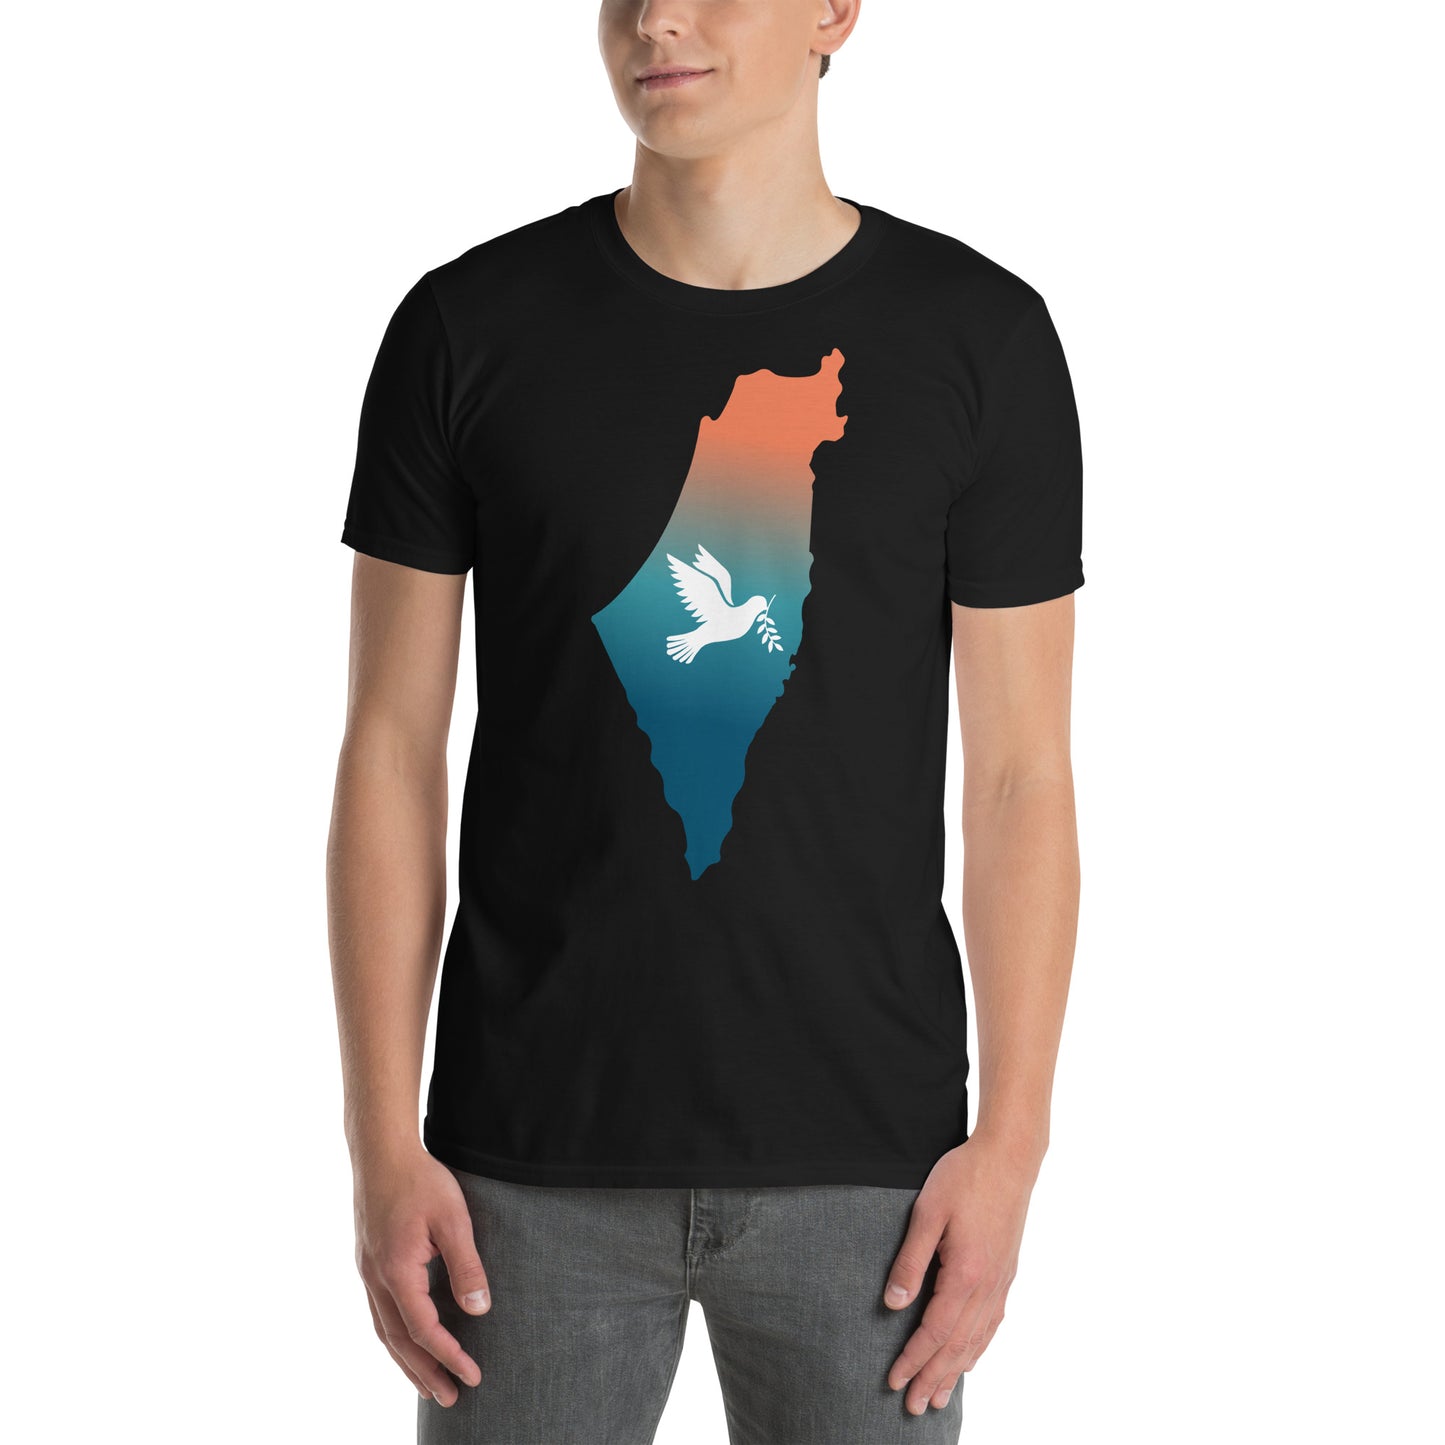 Peace in Israel Unisex T-Shirt